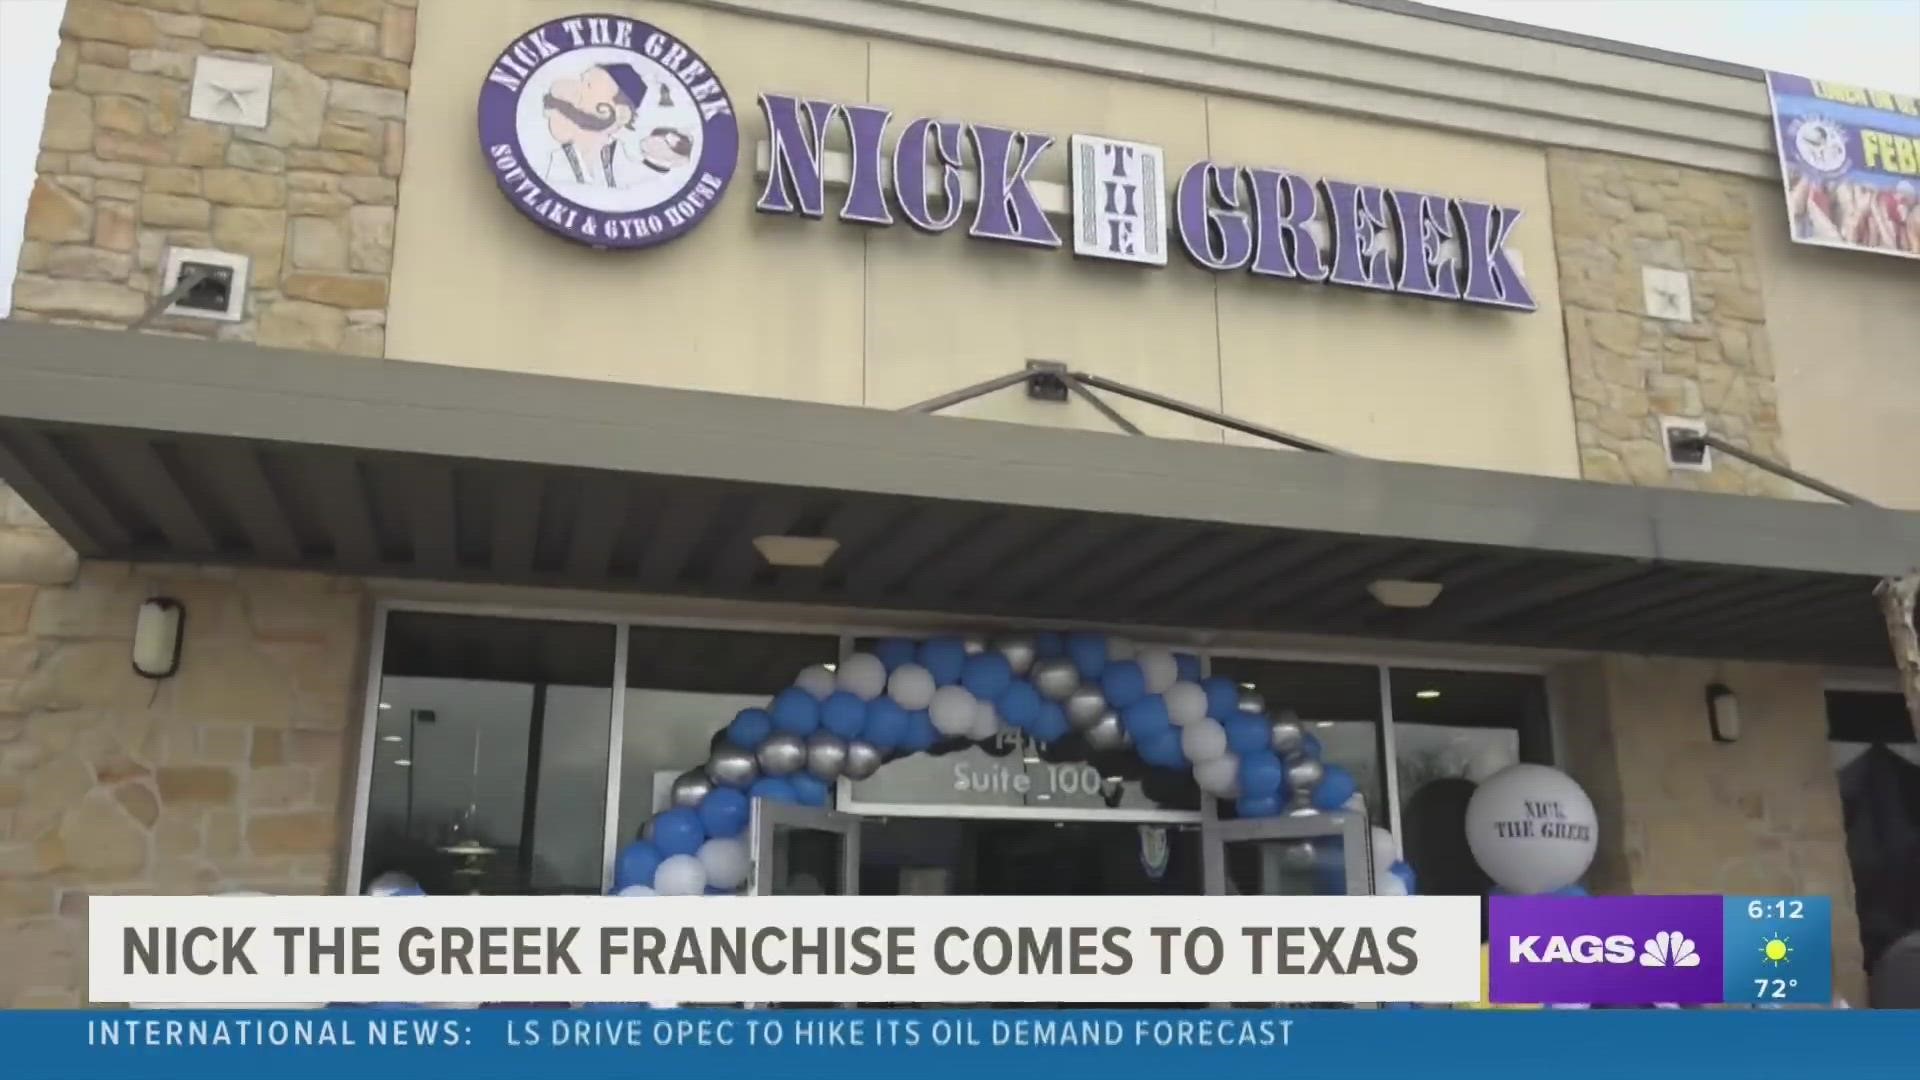 The Greek inspired franchise had its grand opening today at its new College Station location.